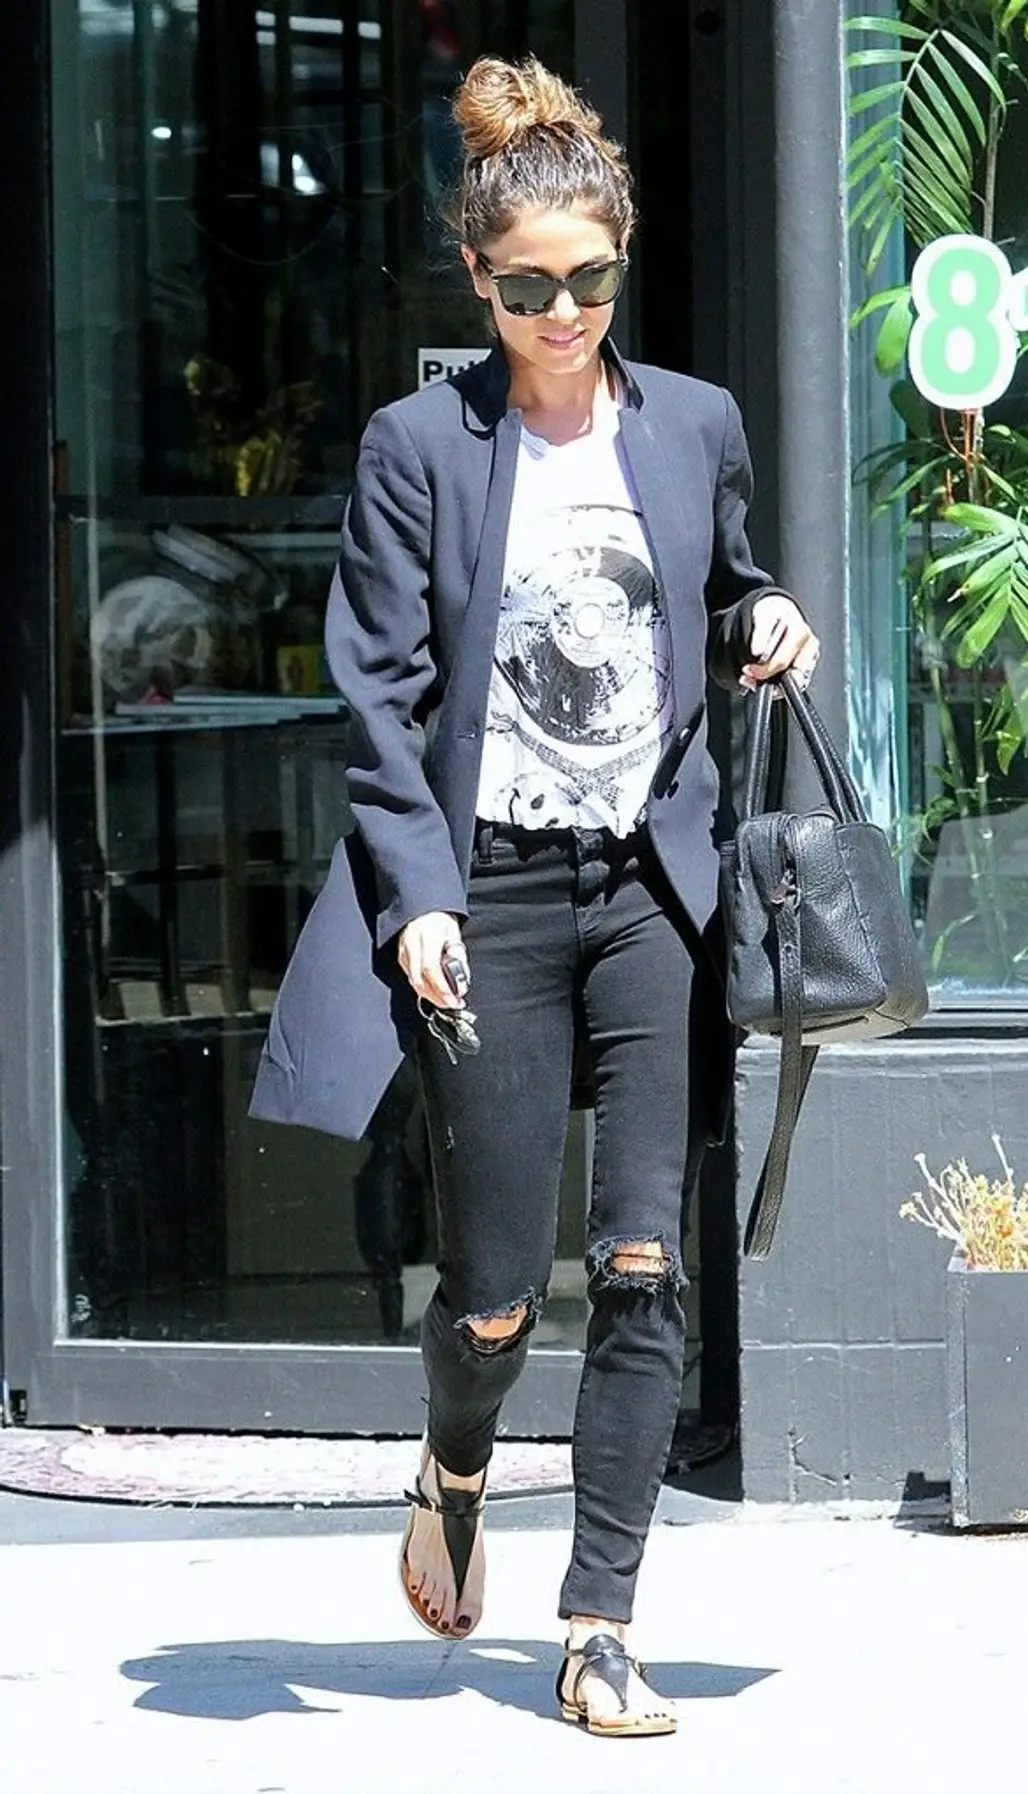 Nikki's Ripped Jeans + Graphic Tee